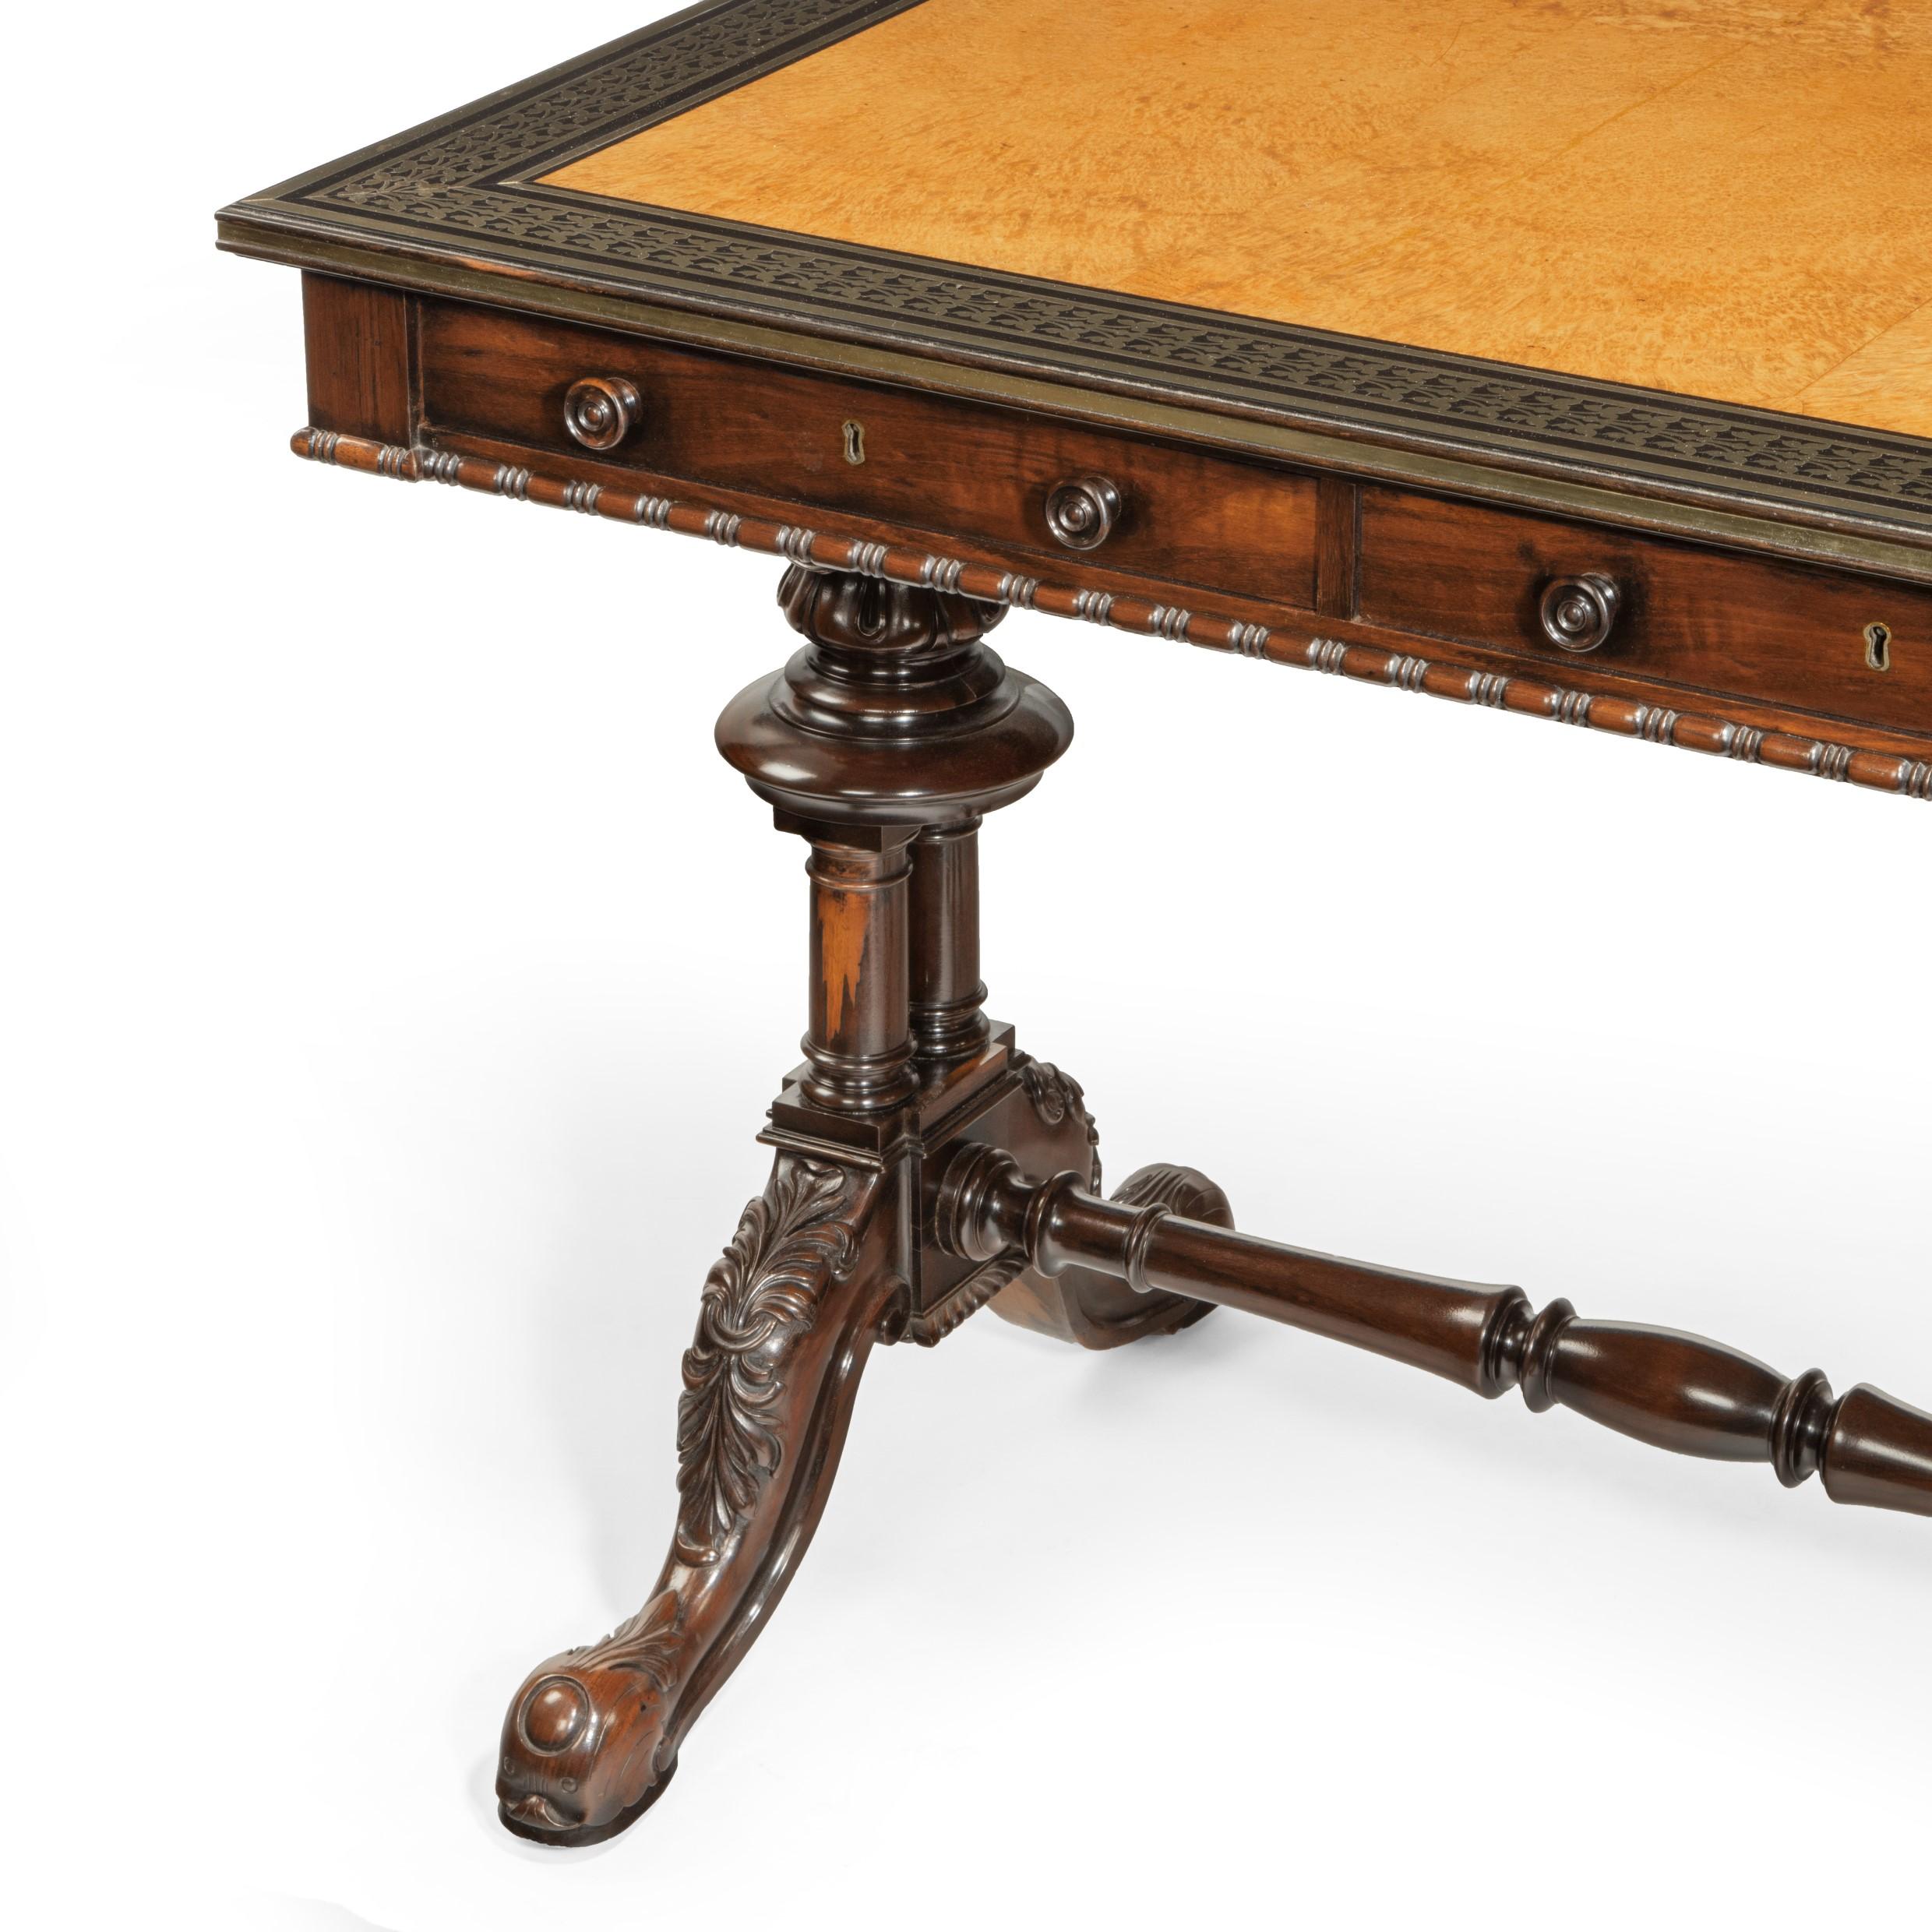 Early 19th Century Striking Goncalo Alves 'Albuera Wood' Writing Table Attributed to Gillows